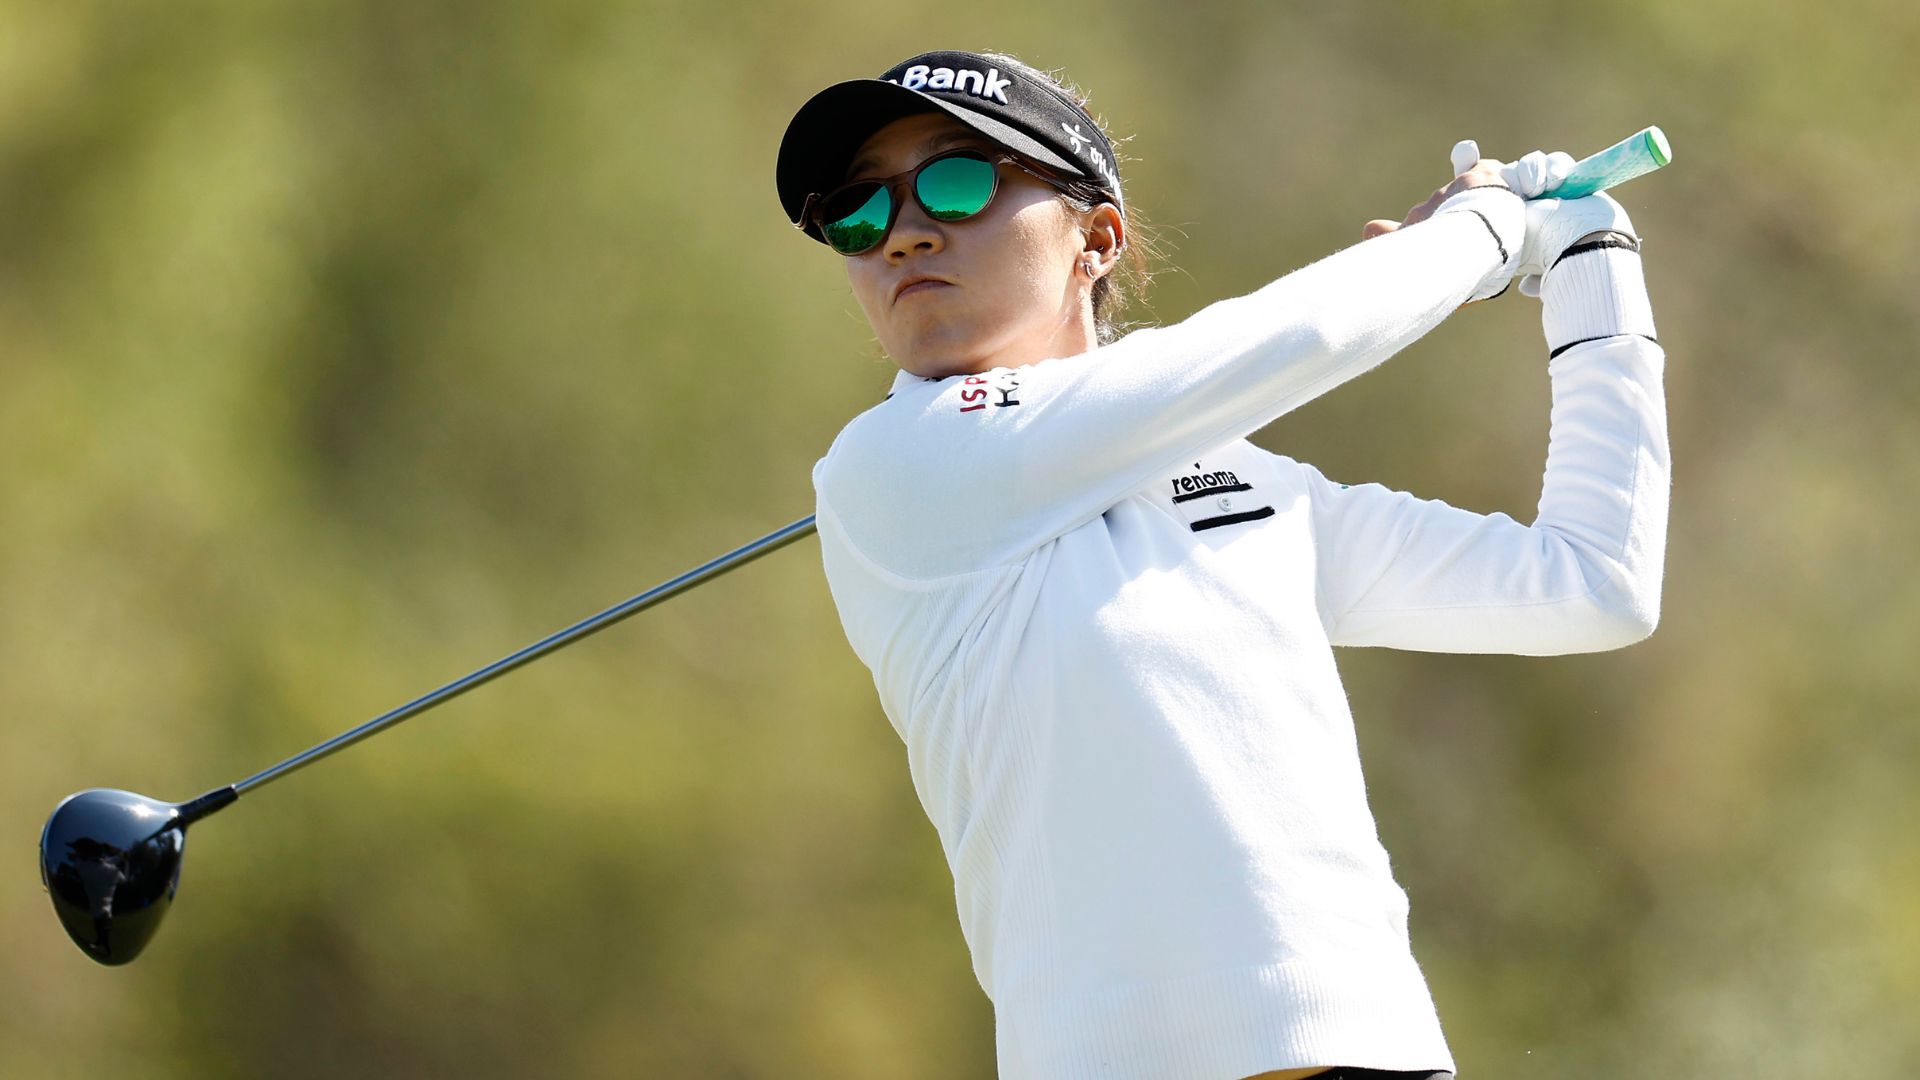 Lydia Ko opens CME Group Tour Championship by hitting tree, but leads after Day 1